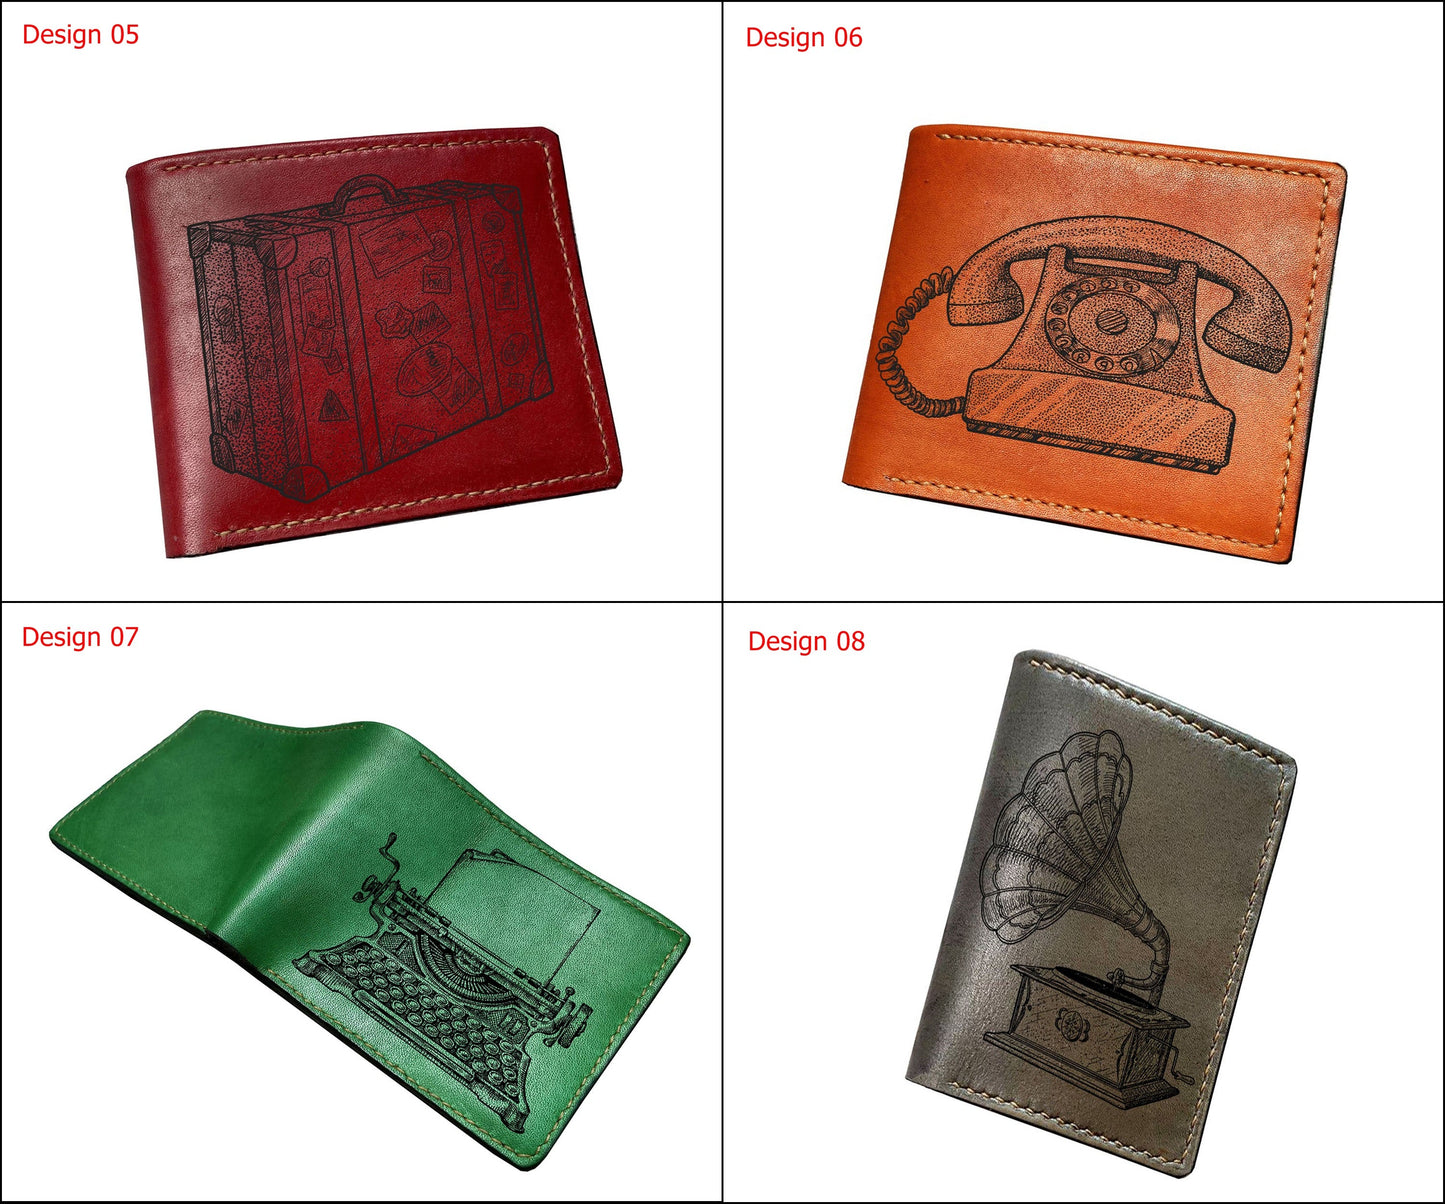 Mayan Corner - Vintage object retro style wallet, bicycle drawing pattern gift, engrave wallet for him, personalized leather men wallet, cool leather gift